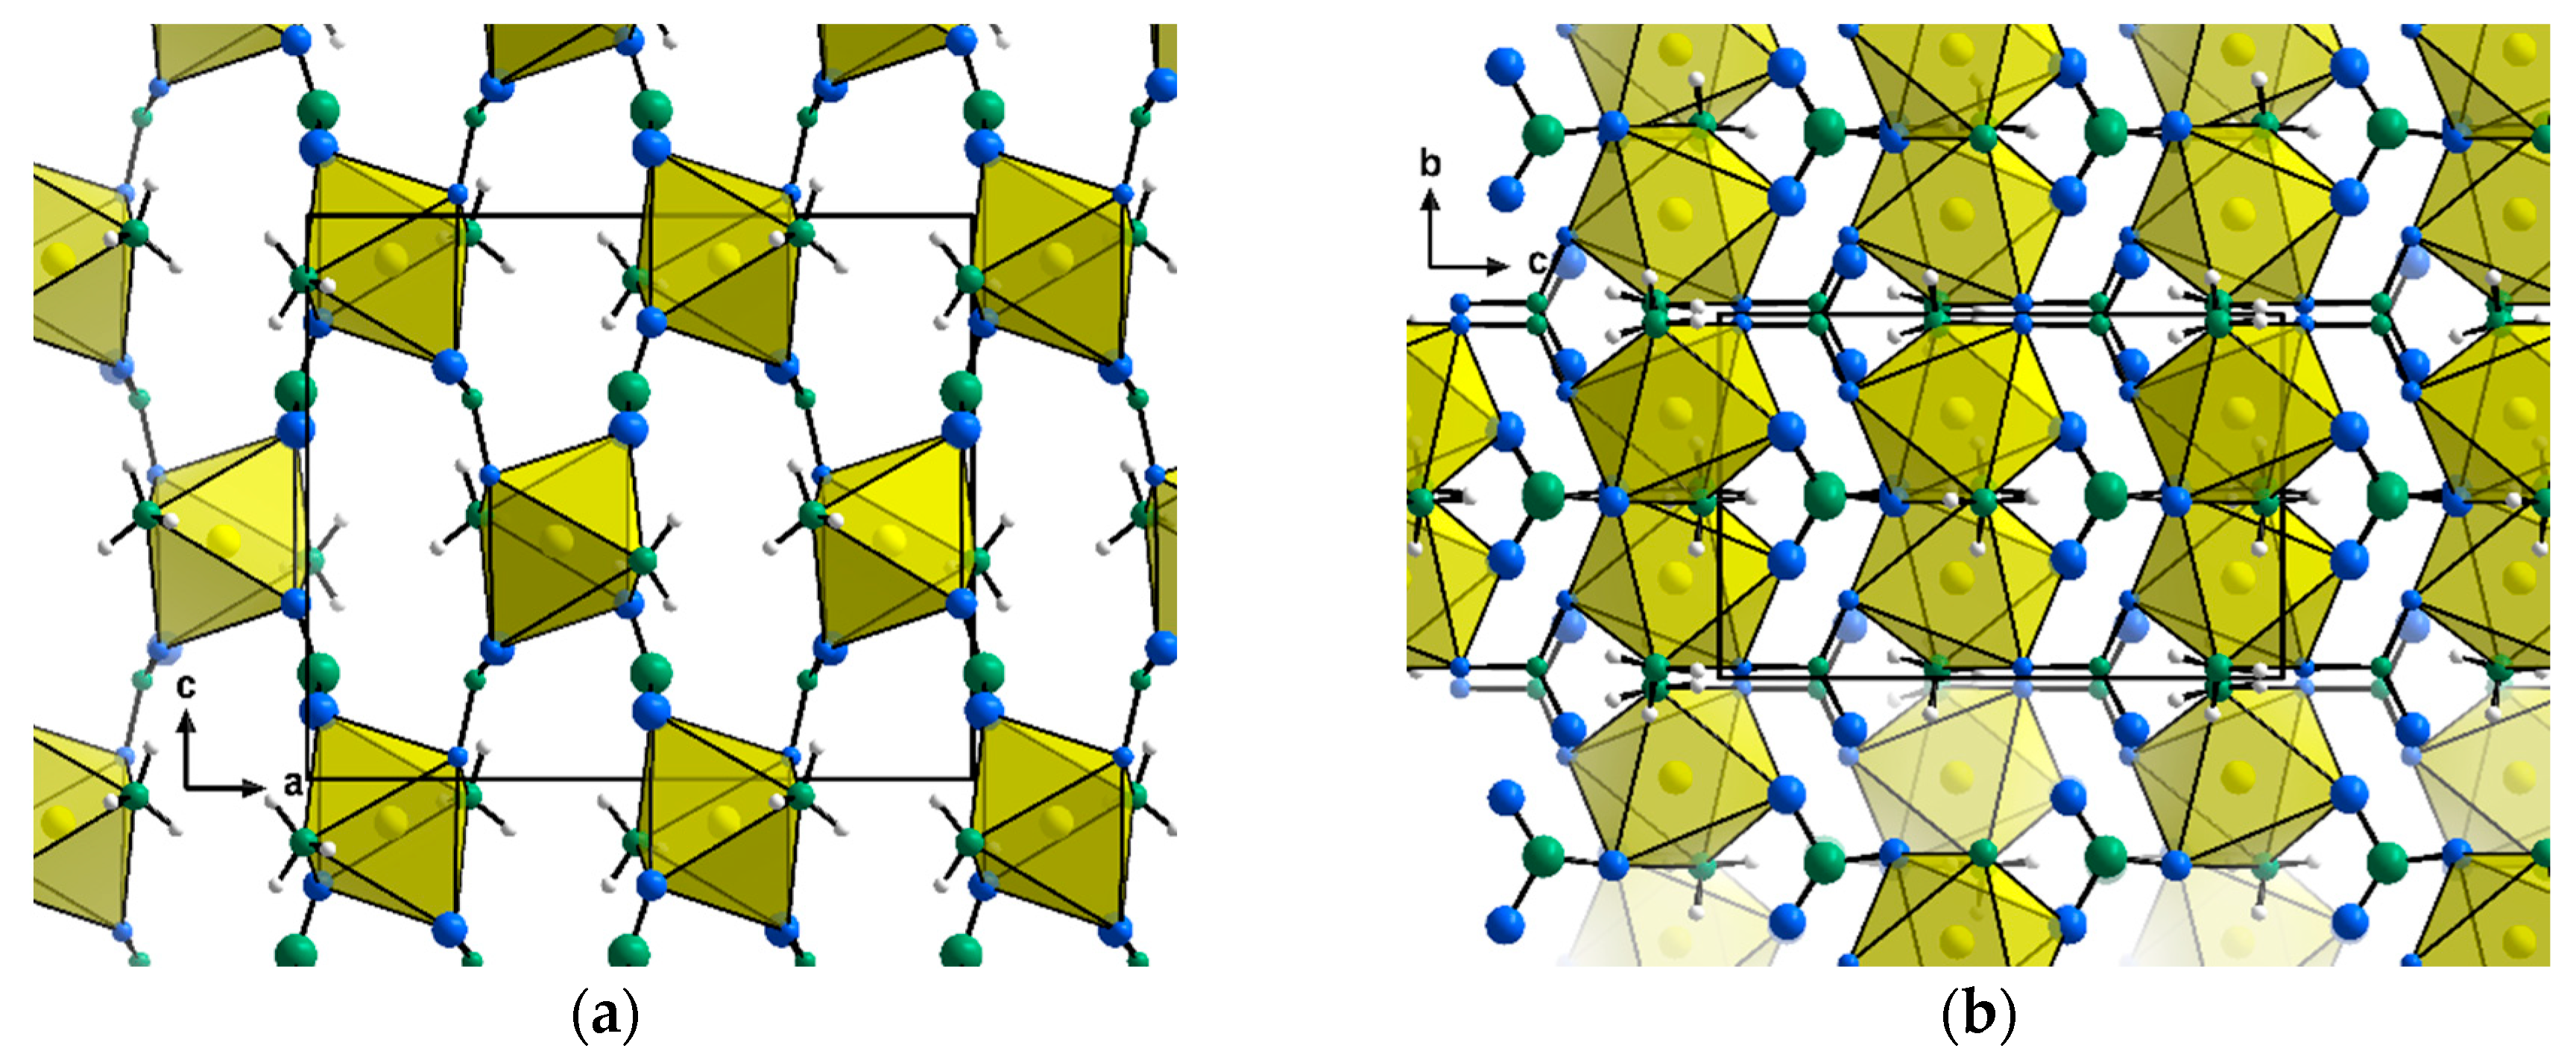 Inorganics Free Full Text Ni Nh3 2 No3 2 A 3 D Network Through Bridging Nitrate Units Isolated From The Thermal Decomposition Of Nickel Hexammine Dinitrate Html